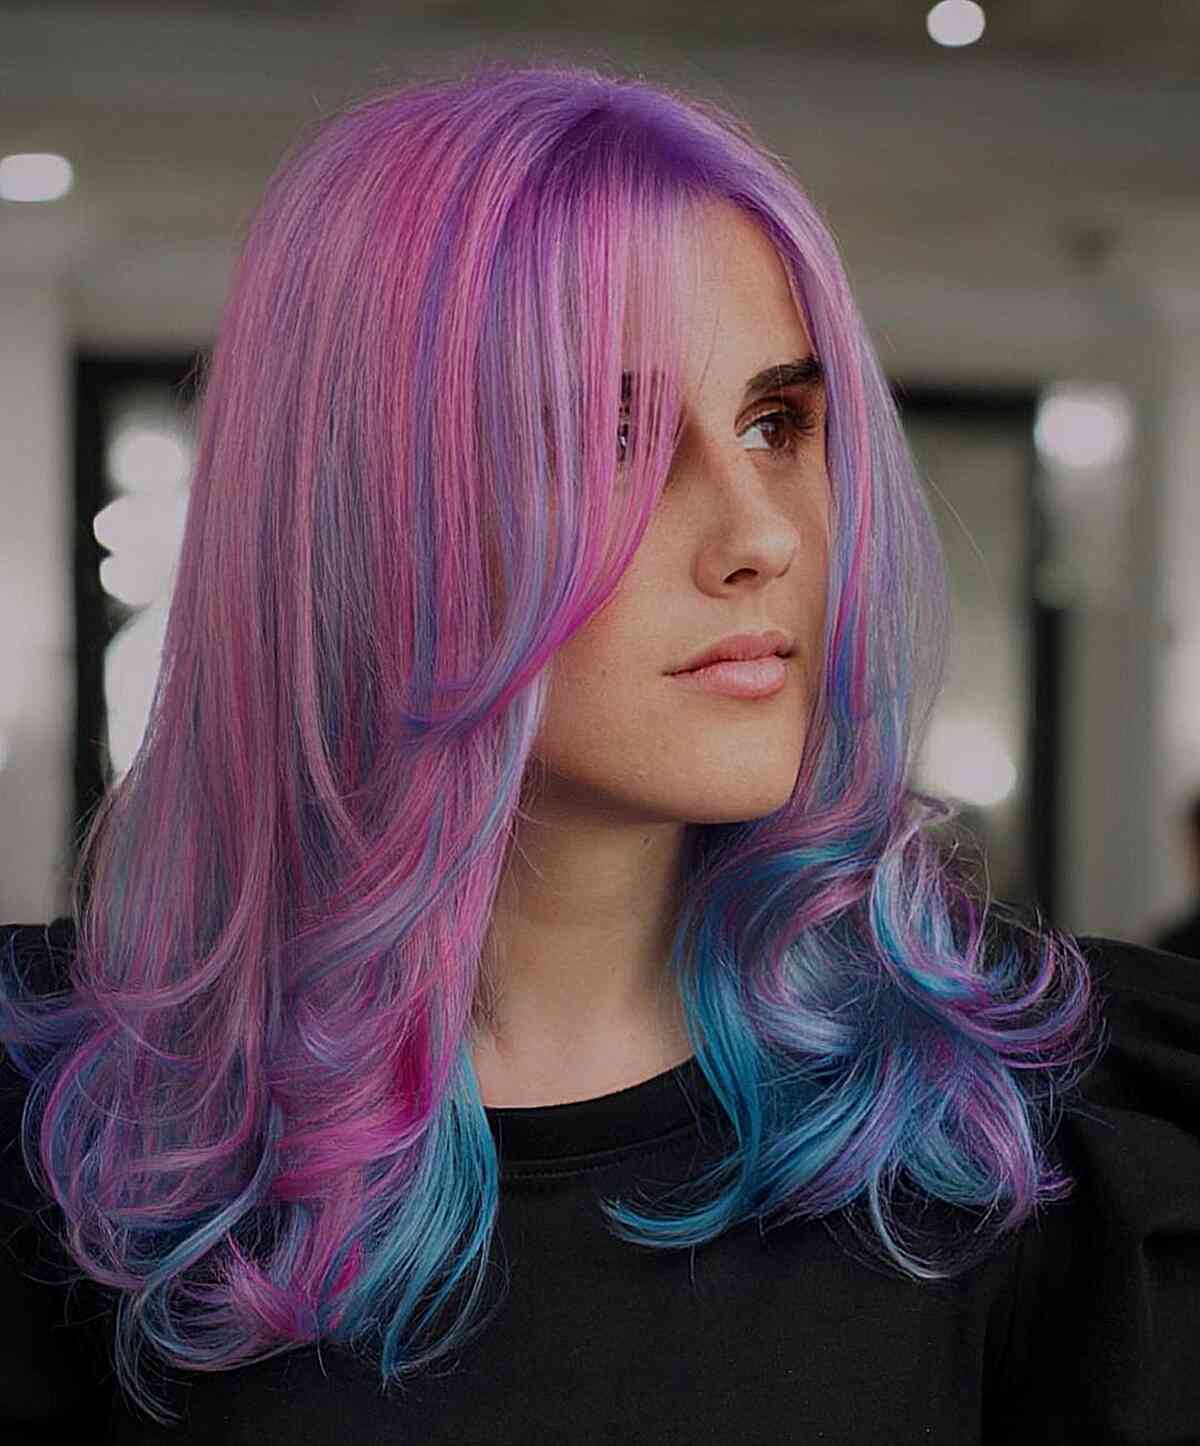 Candy Swirled Rainbow Hair for ladies with an edgy vibe and style